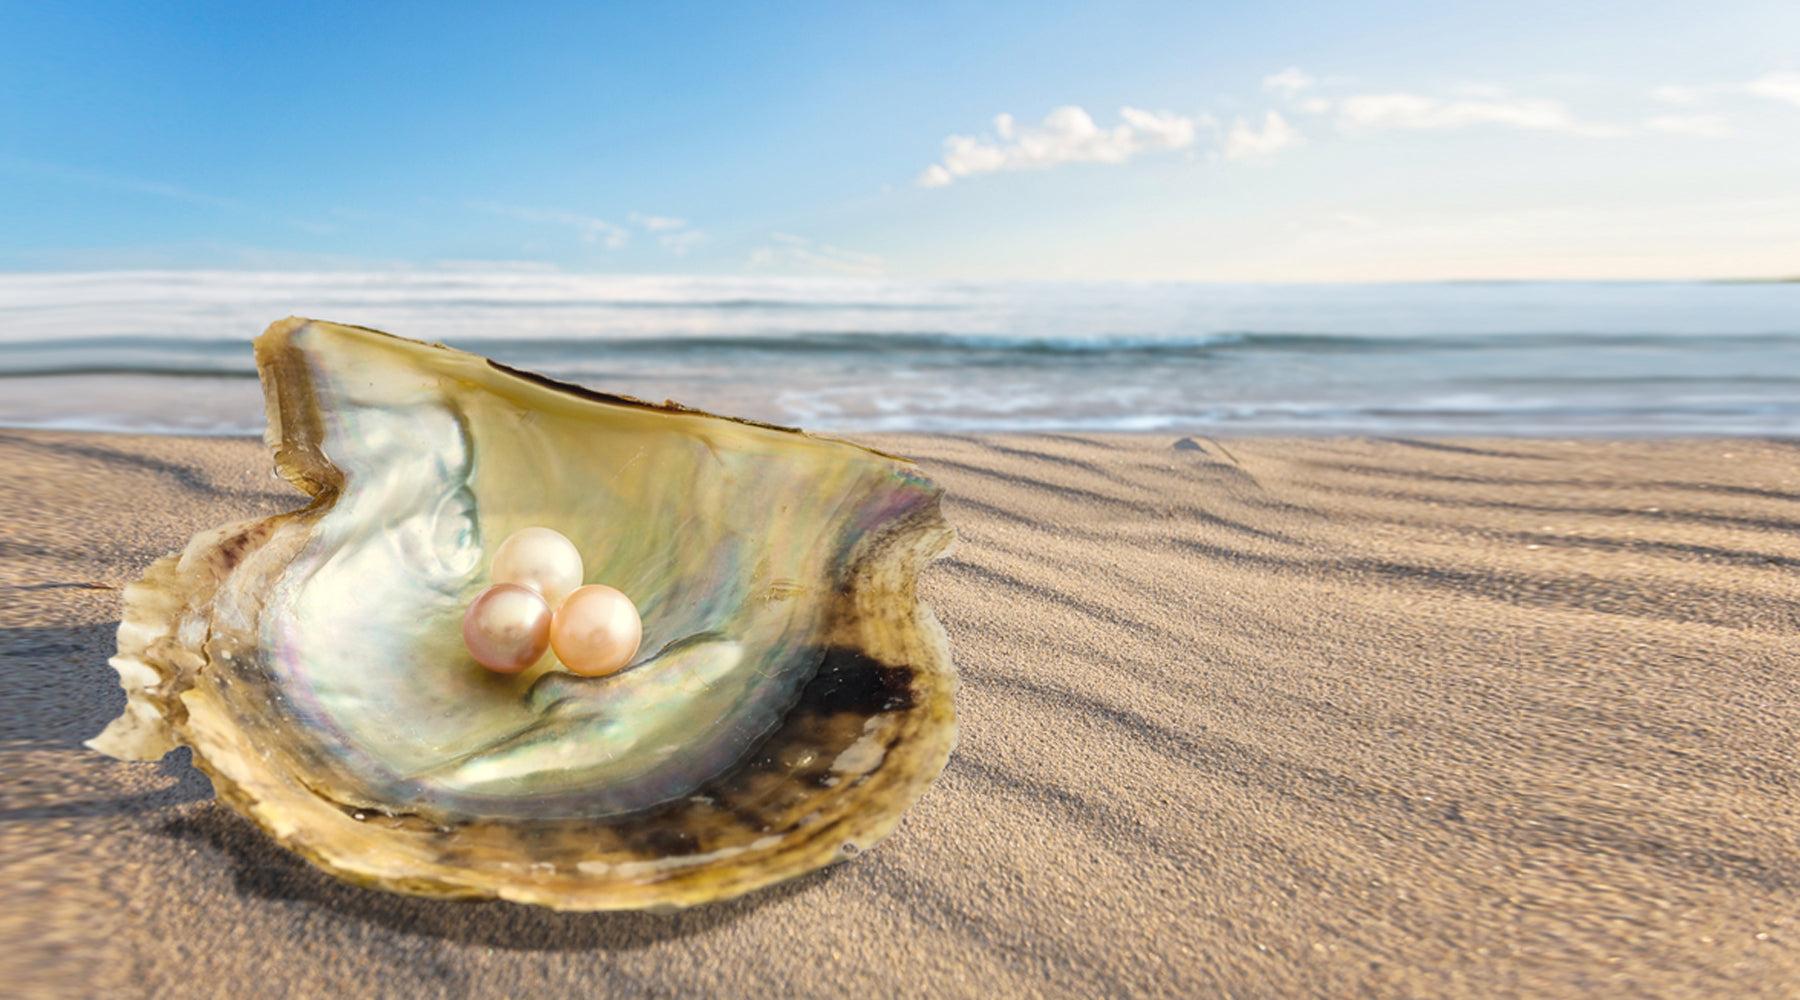 What Are The Chances Of Finding A Pearl In An Oyster?